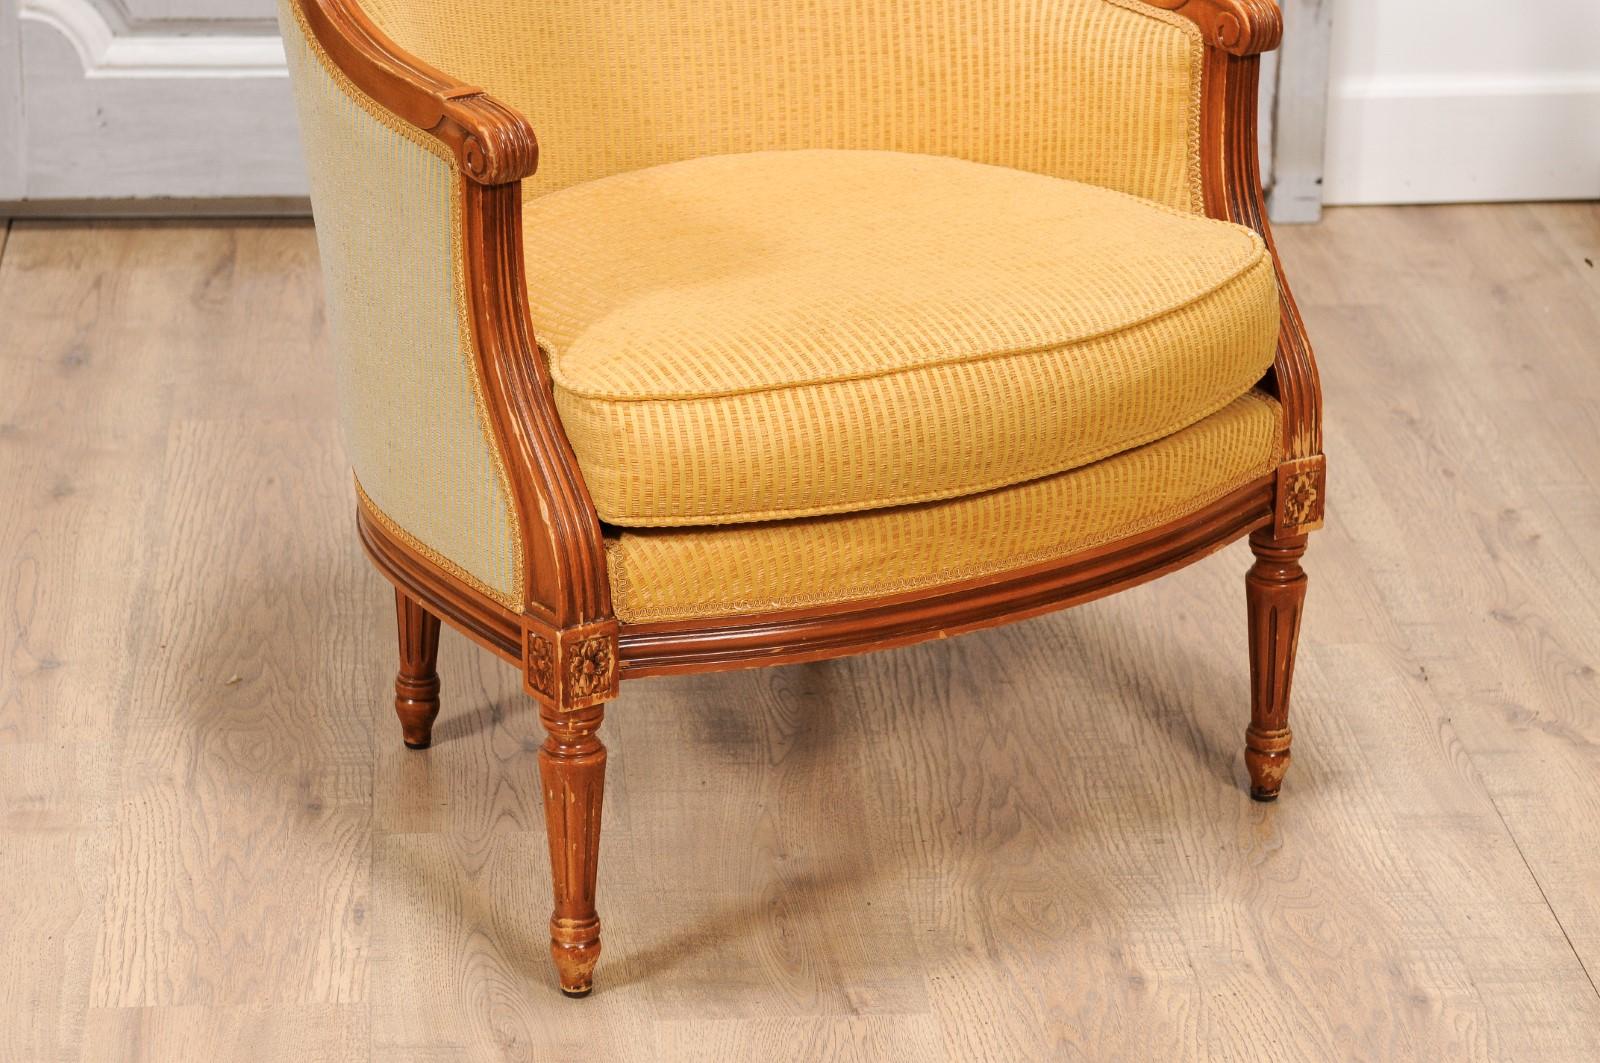 French Louis XVI Style Walnut Bergères Chairs with Wraparound Backs, Pair For Sale 7